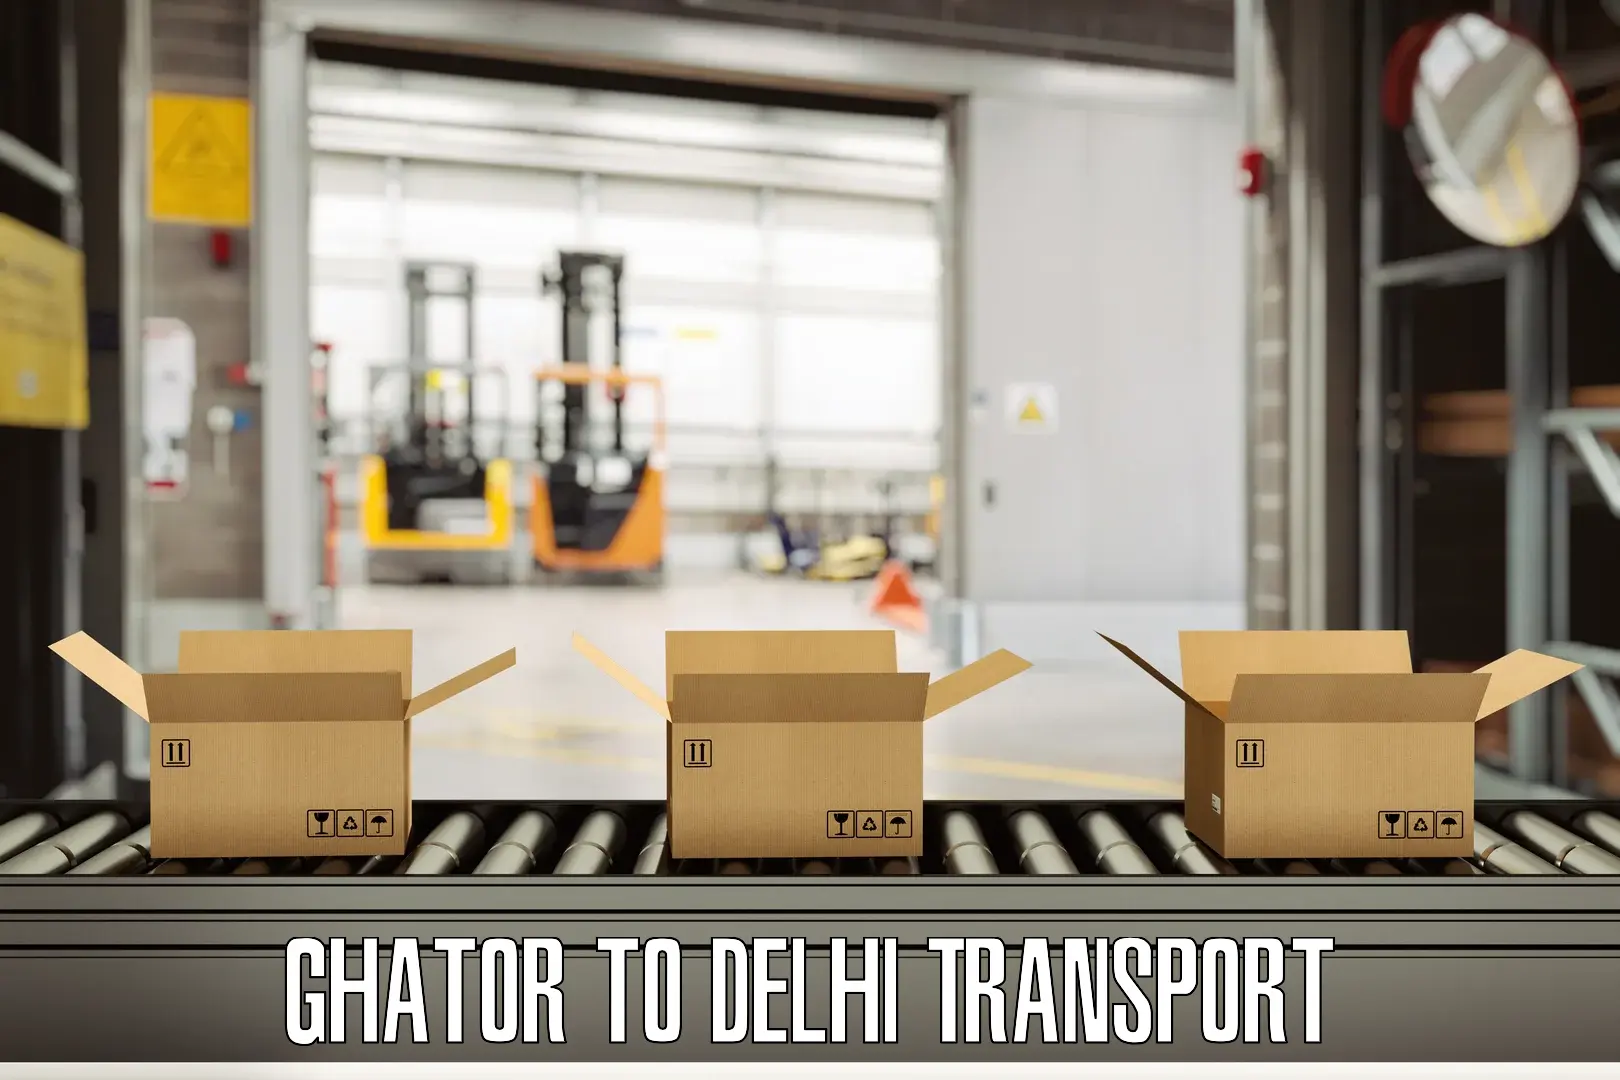 Express transport services Ghator to NCR